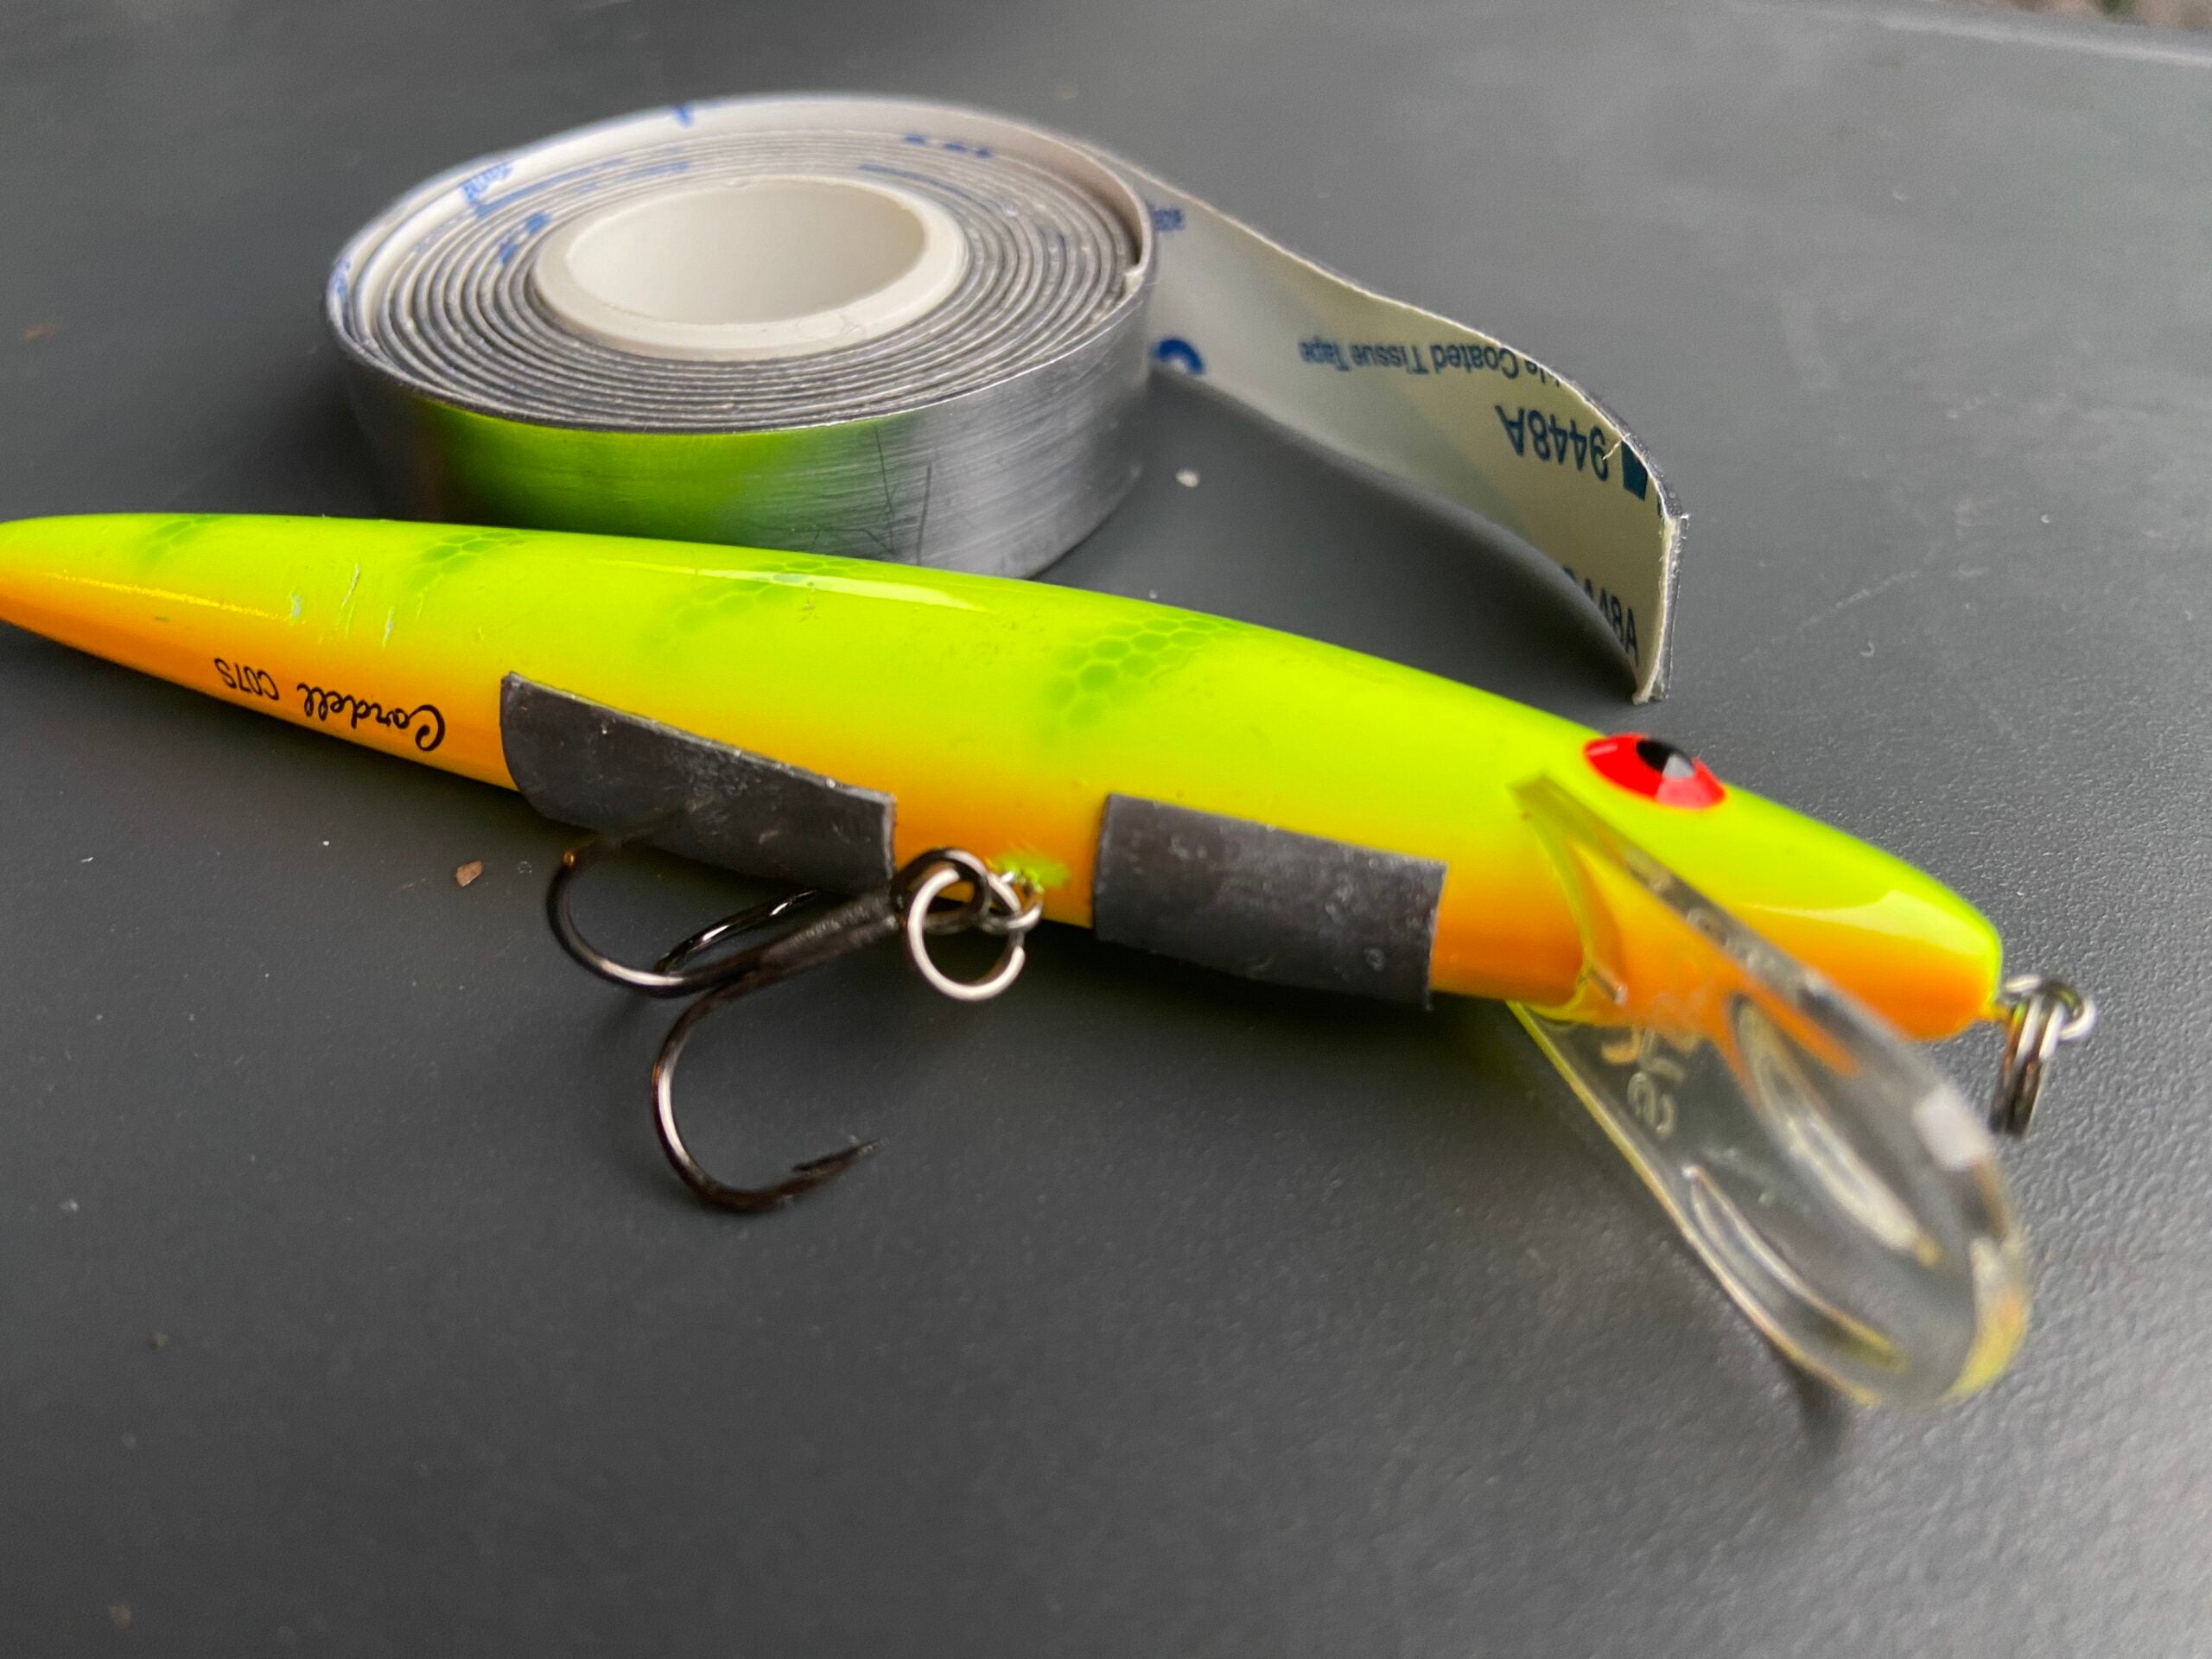 Suspending Jerkbait: How to Catch Fish on These Lures